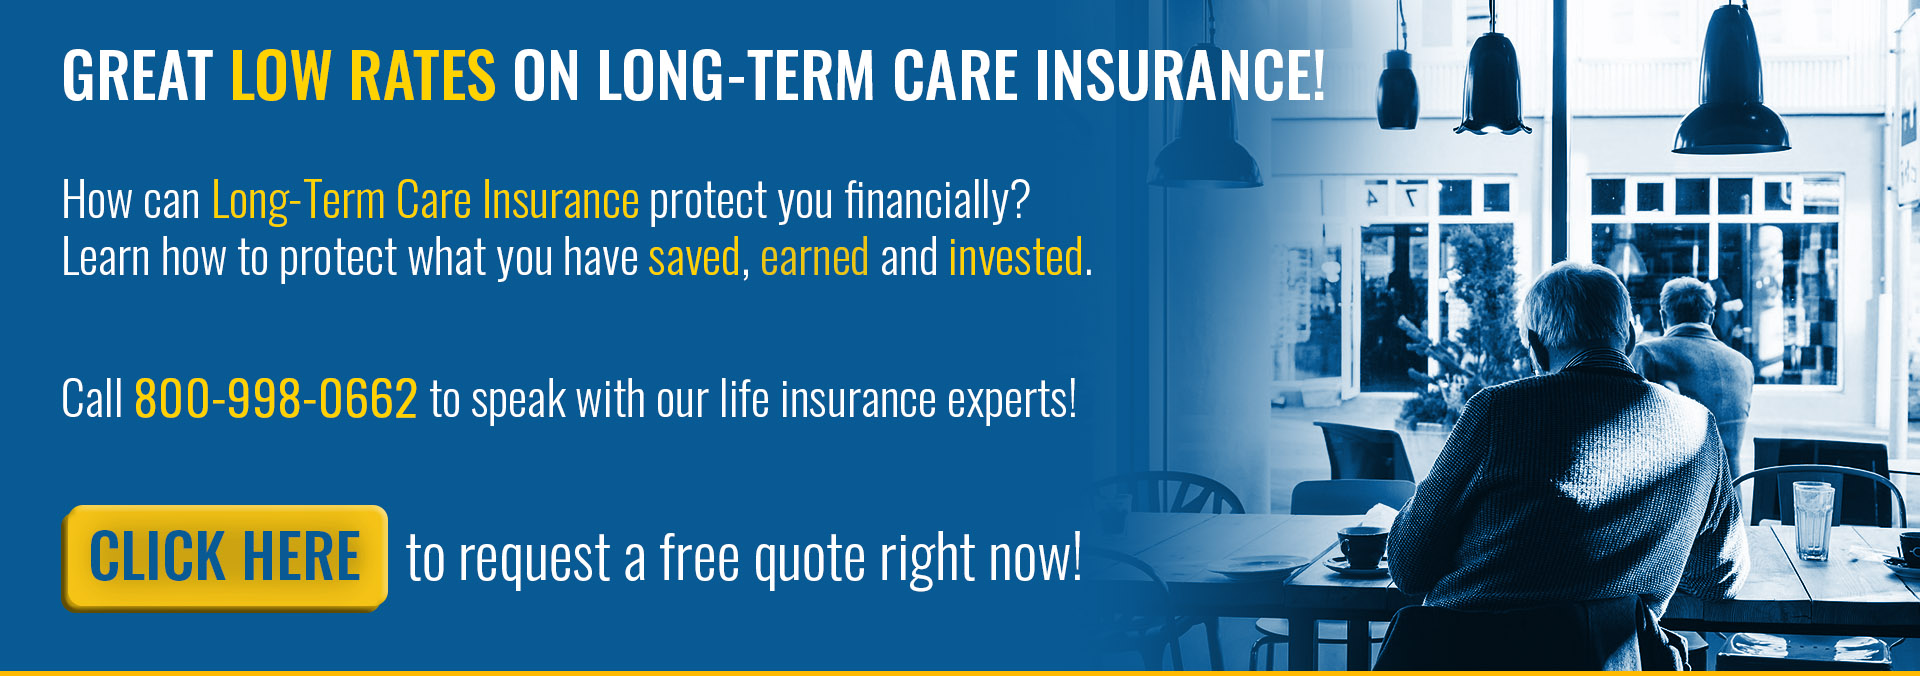 low rates on long term care insurance. click here to request a free quote right now.